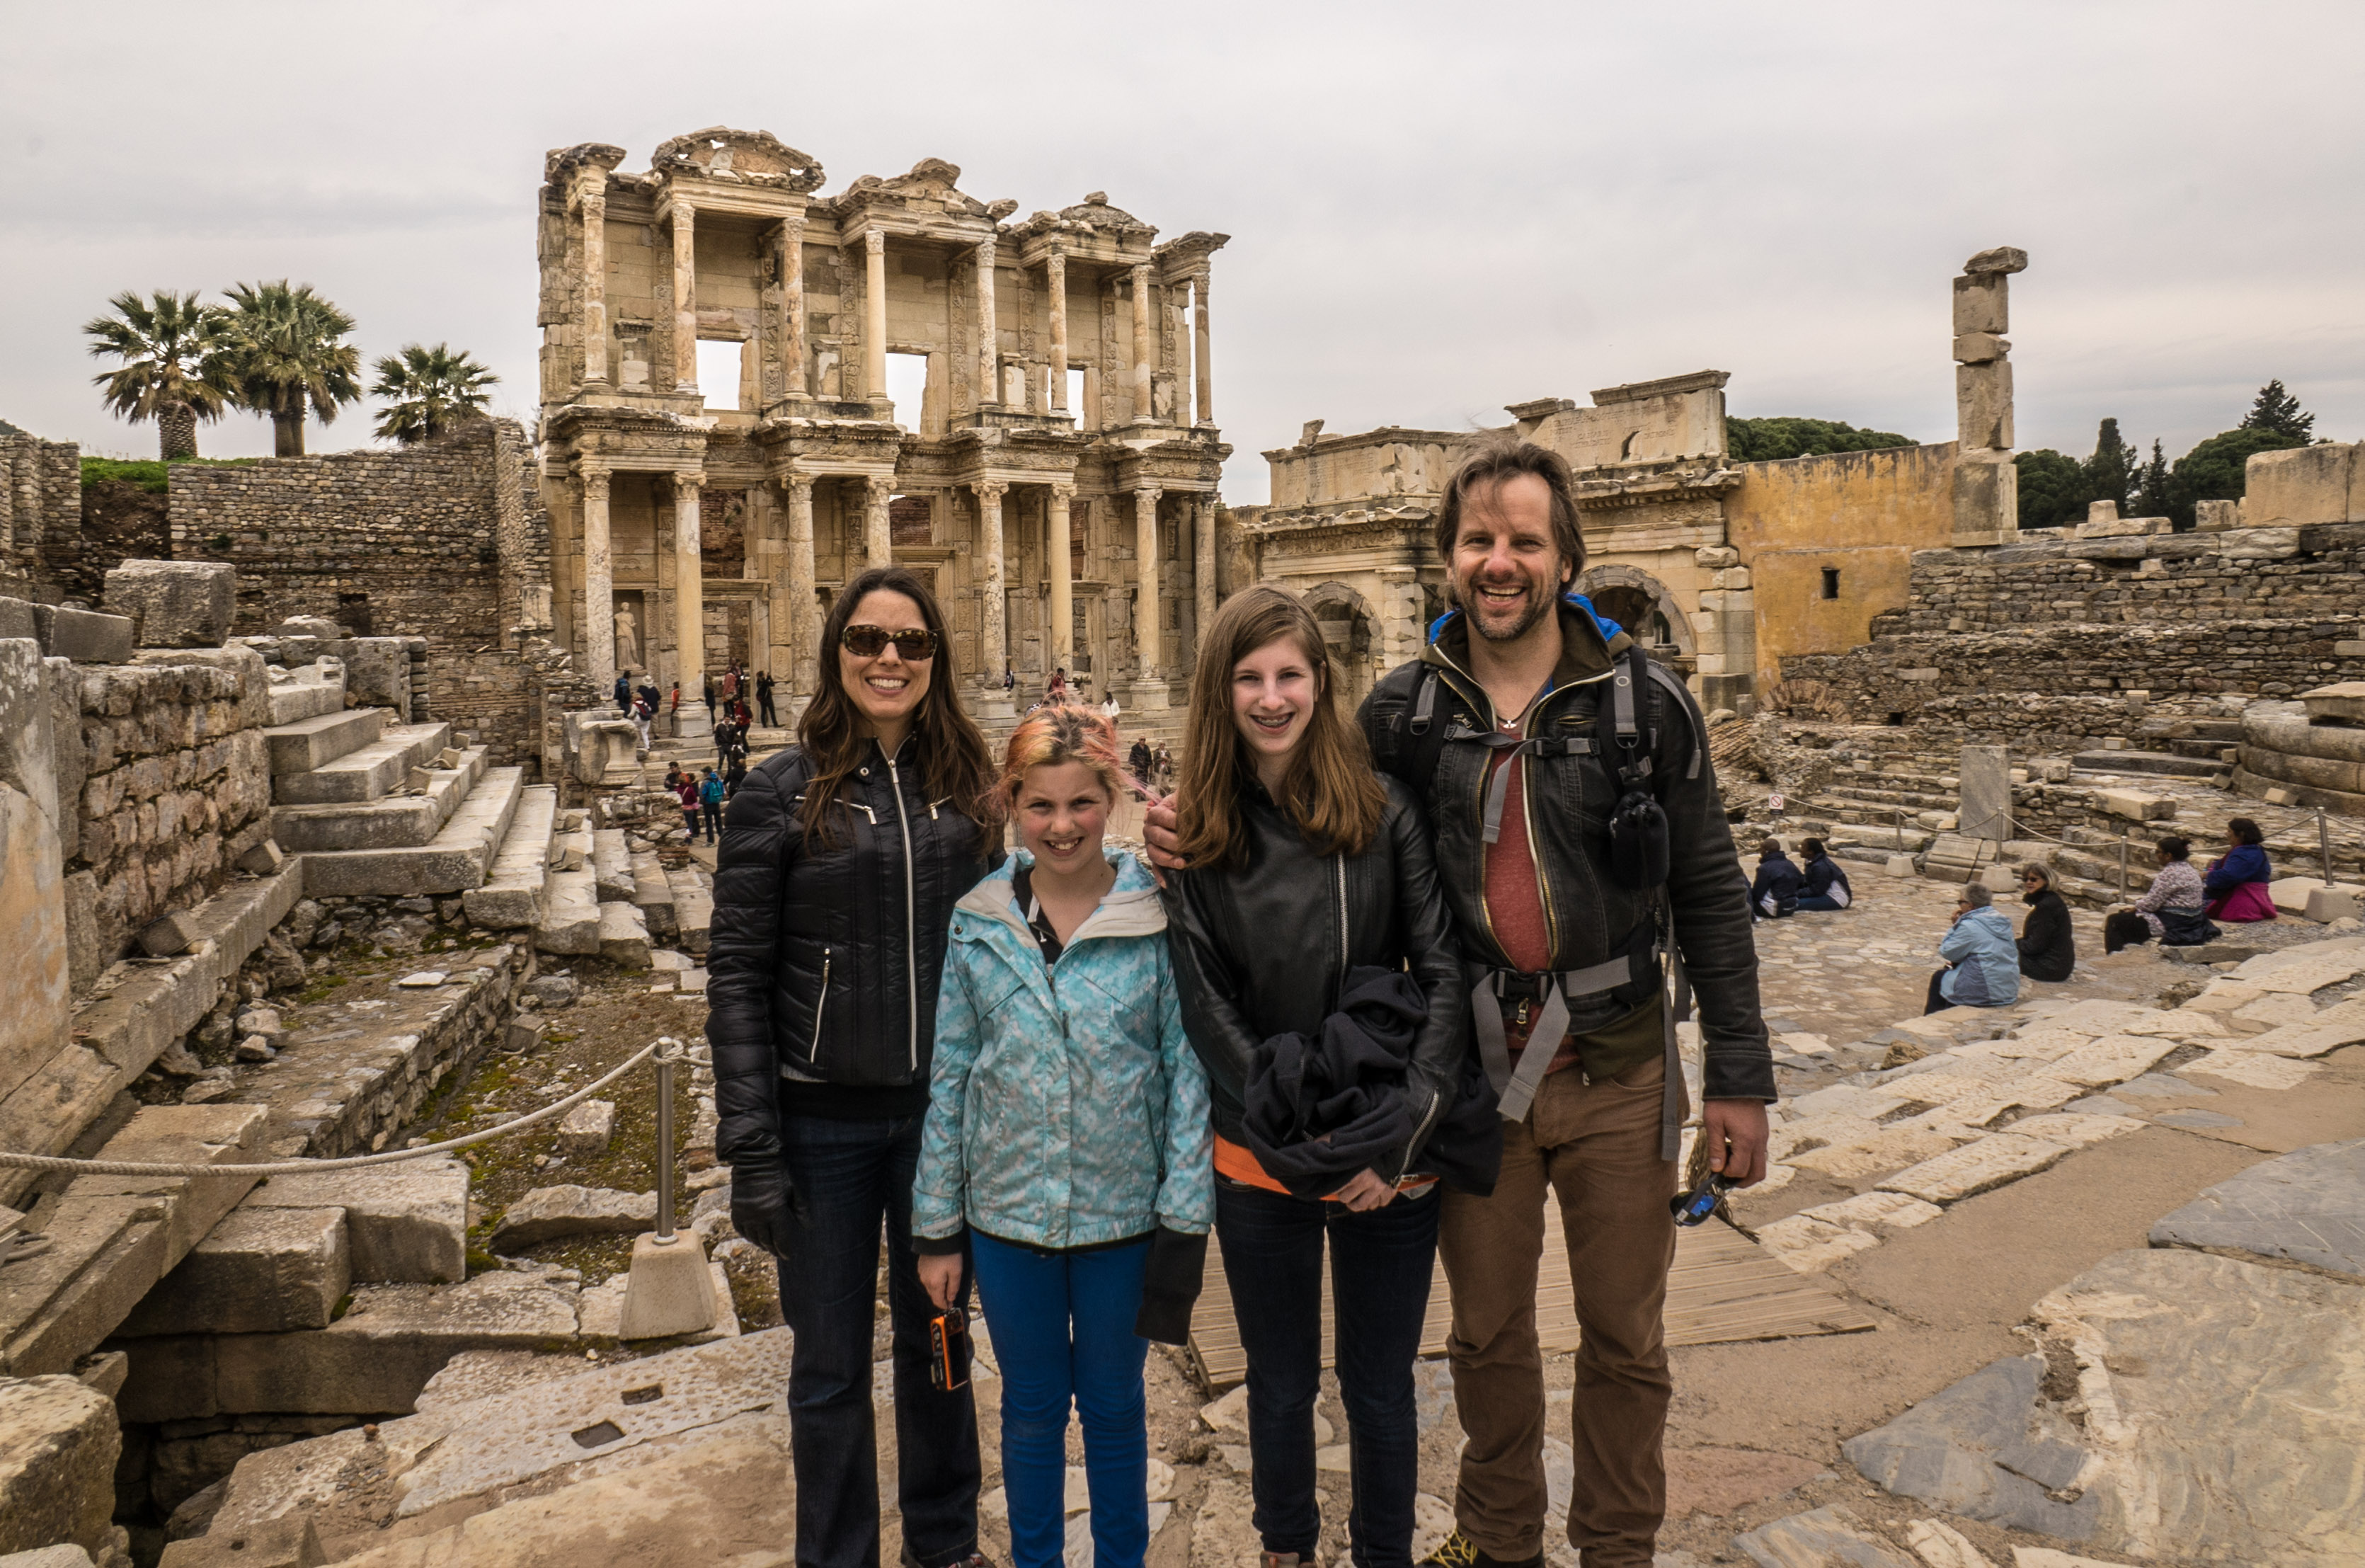 Turkey Day Six: The Roman ruins at Ephesus on a cold spring day